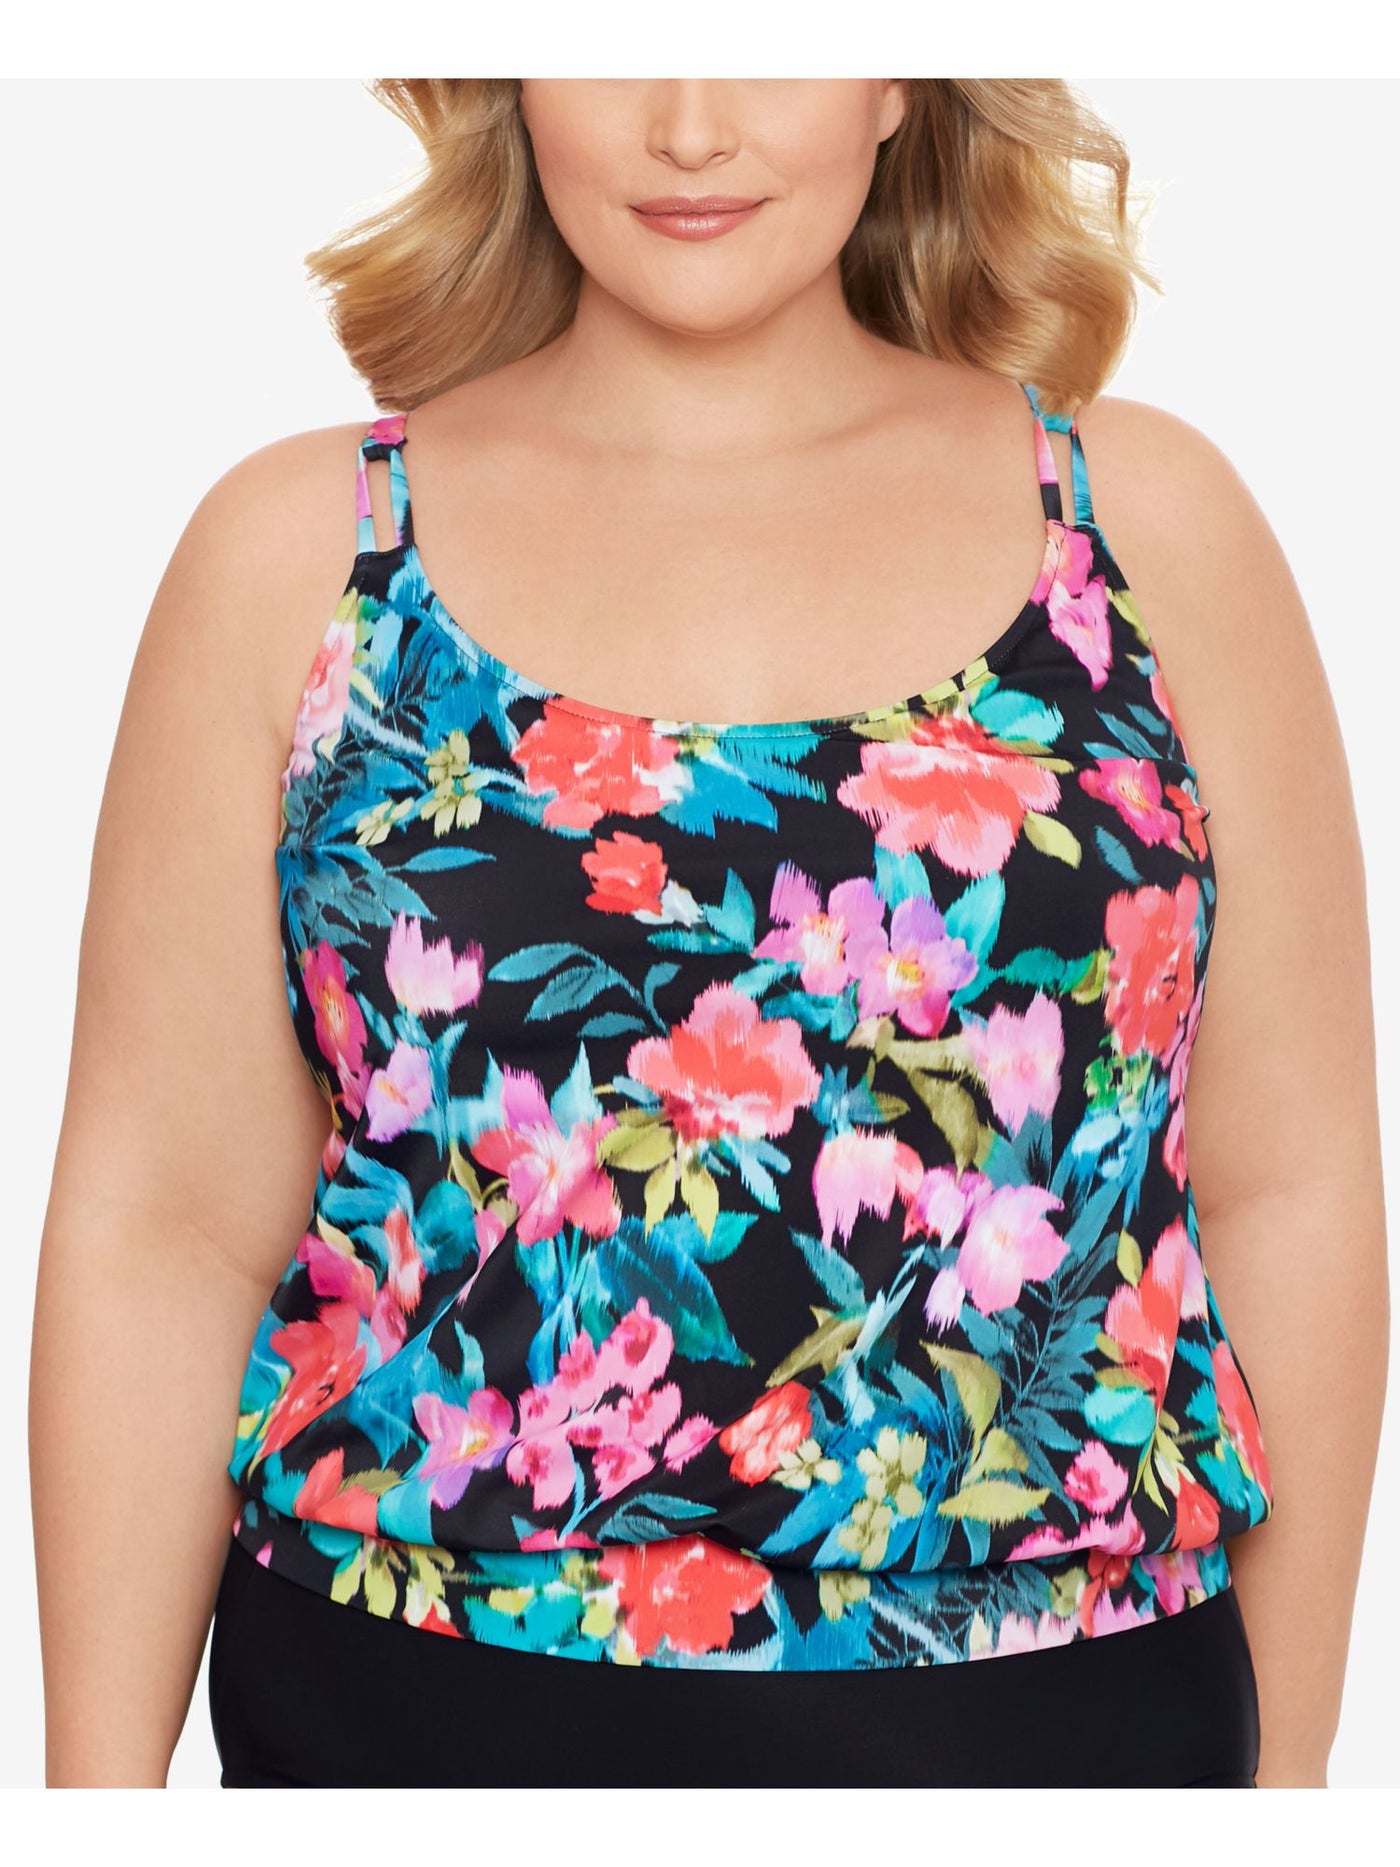 SWIM SOLUTIONS Women's Multi Color Printed Stretch Full Bust Support Blouson Banded-Hem Lined Adjustable Fixed Cups In Living Color Scoop Neck Tankini Swimsuit Top 16W